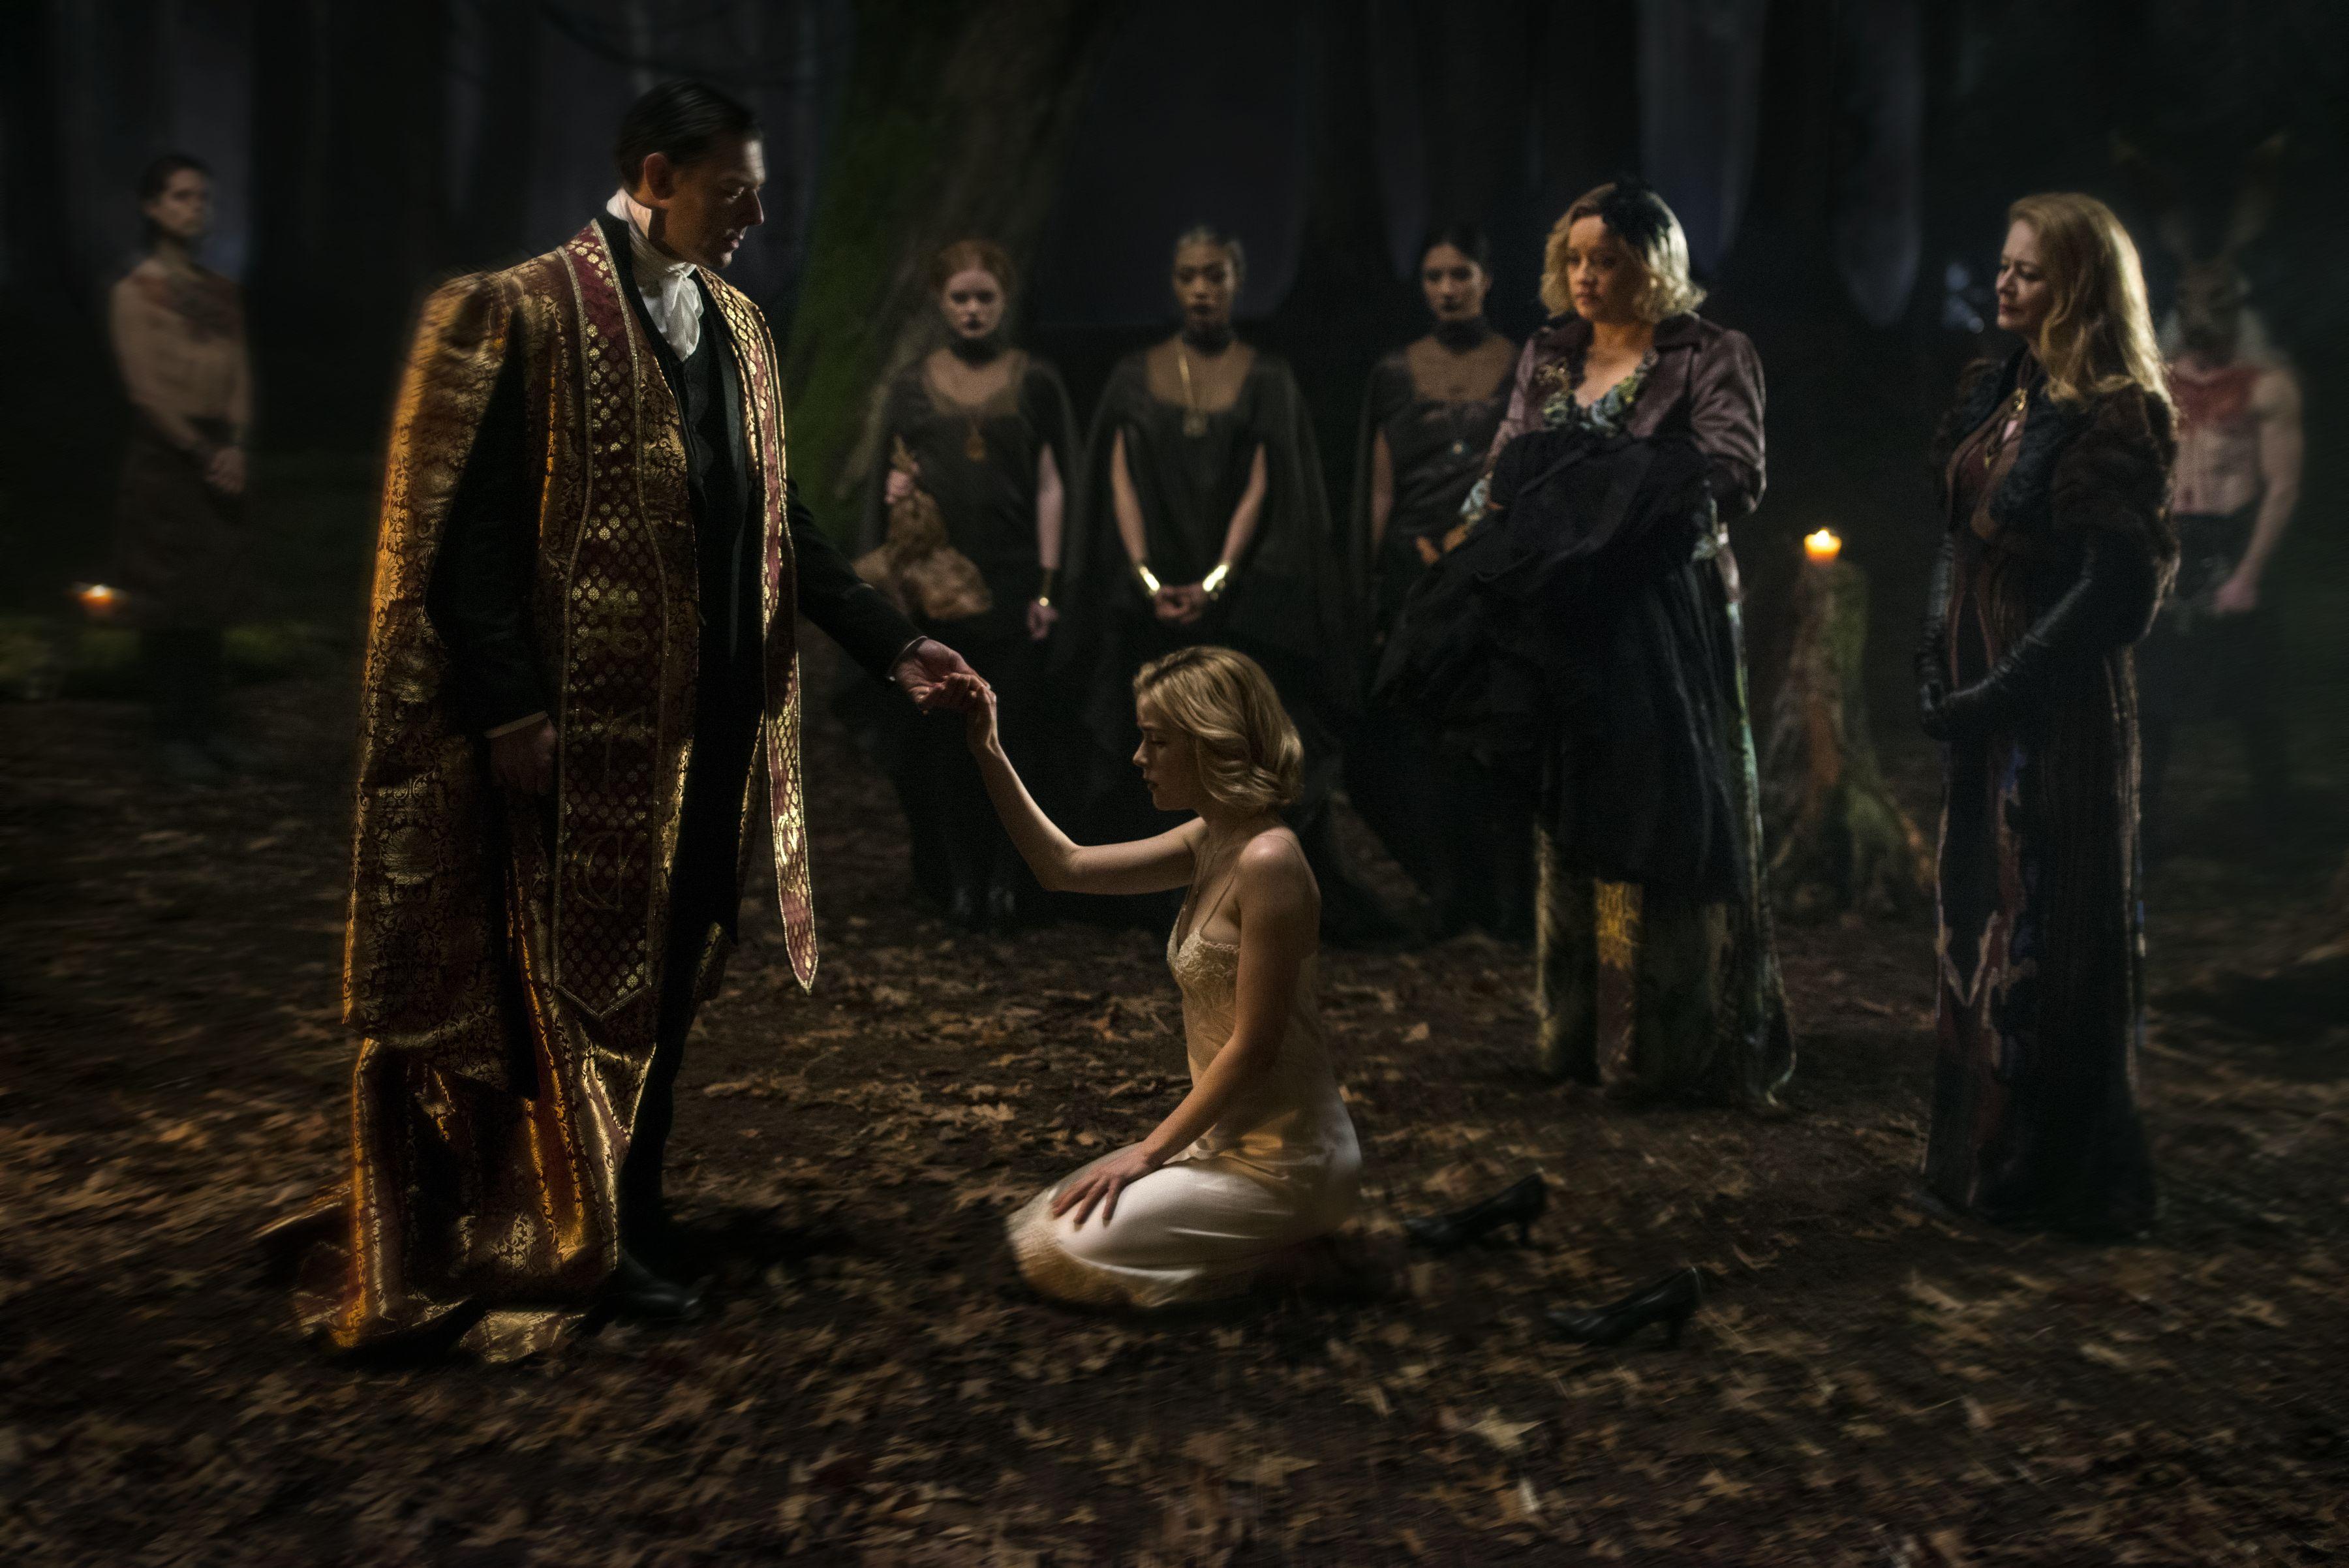 Chilling Adventures of Sabrina Image Reveal Netflix's Teenage Witch